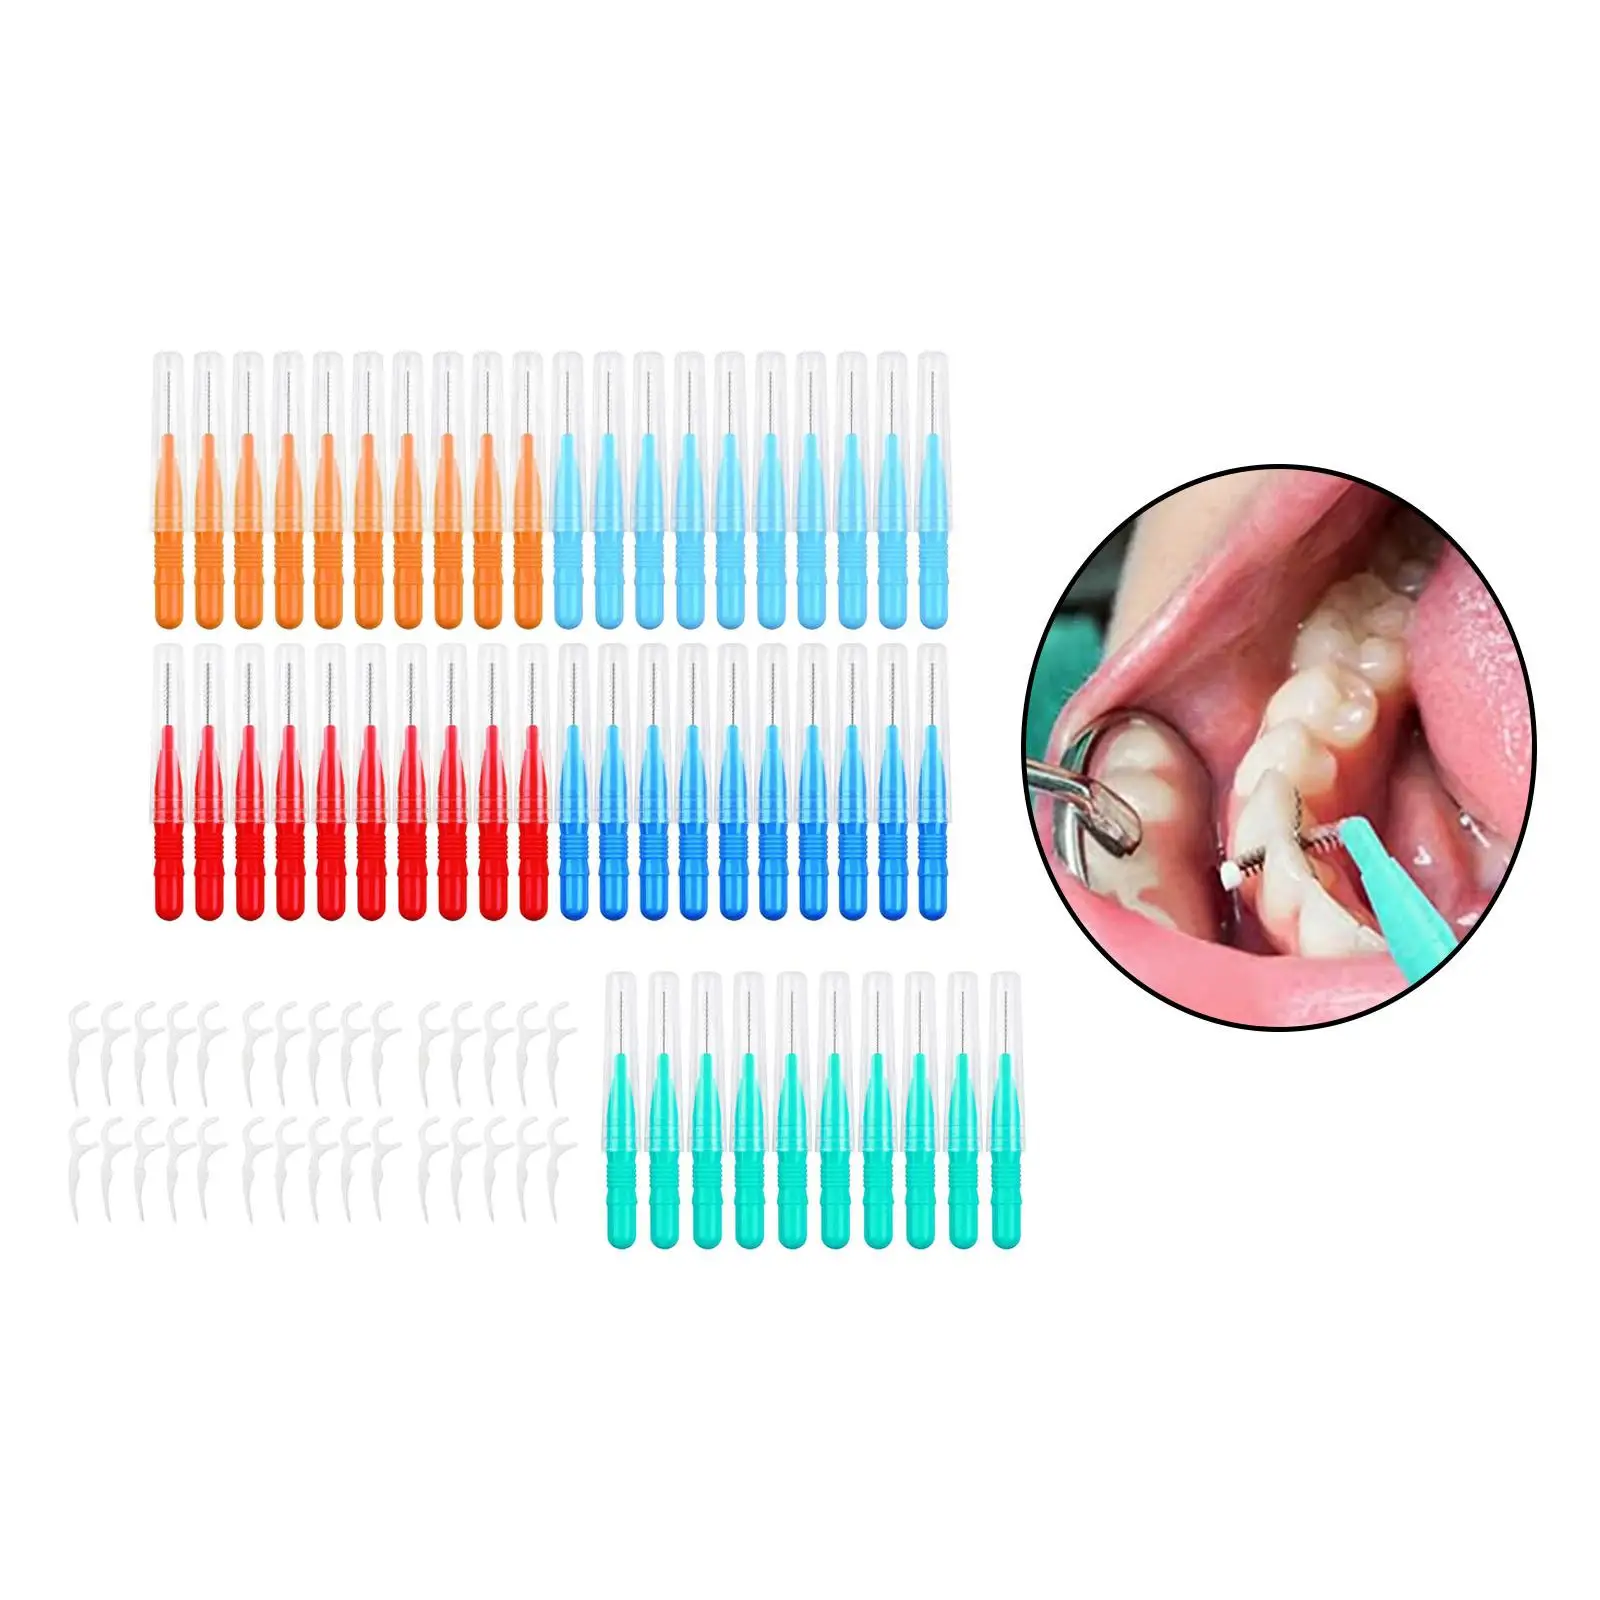 50Pcs Interdental Brushes 2mm 2.5mm 3mm for Cleaning Gaps Between Teeth 30x Floss Flossers Teeth Cleaners 